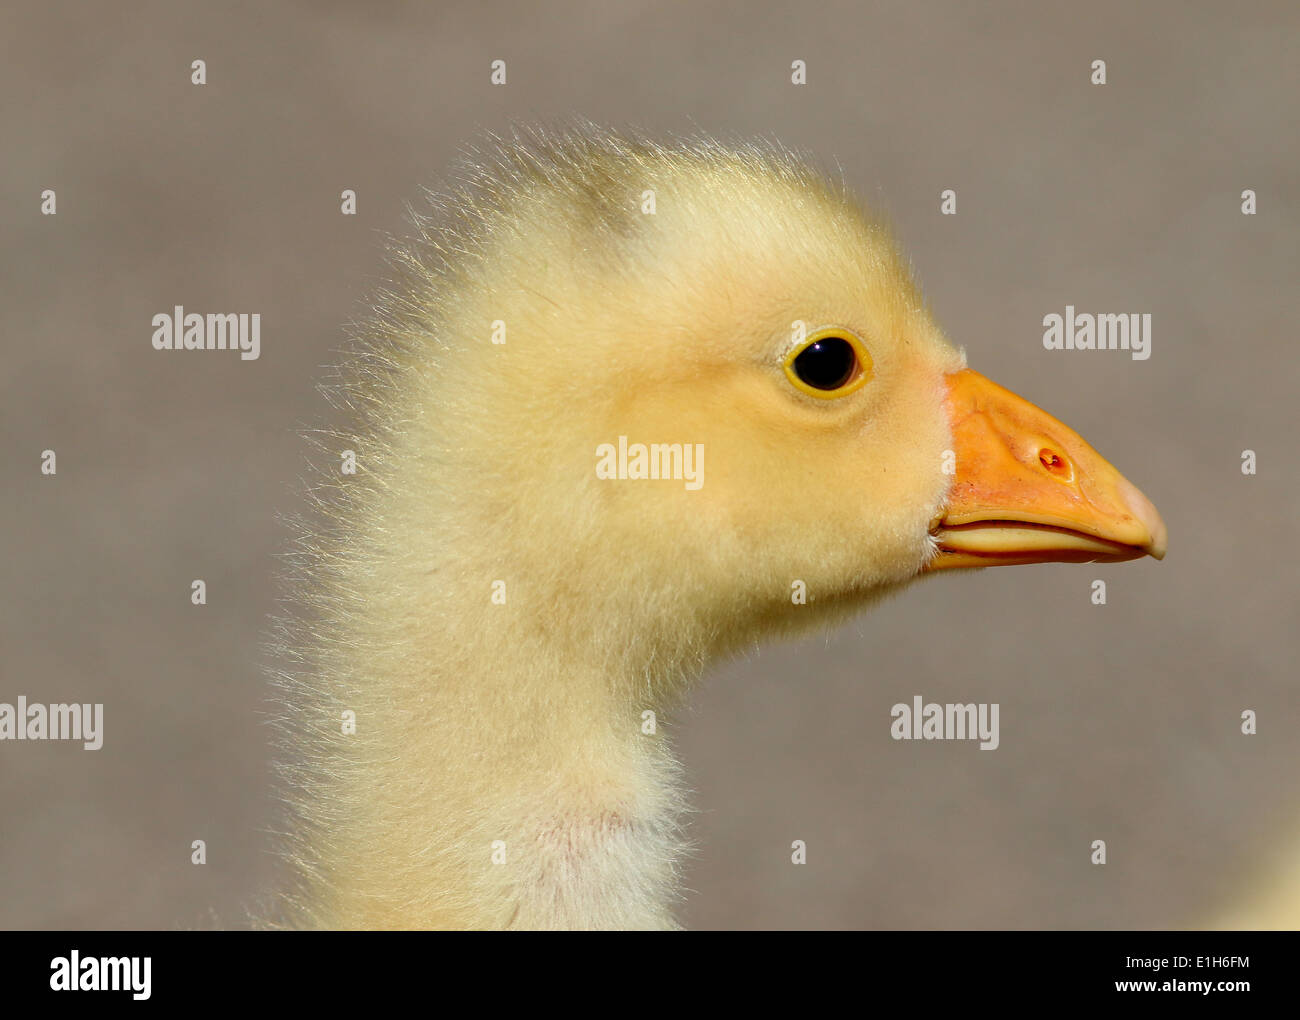 Cute fluffy baby gosling (Anser anser domesticus) in close-up, profile view Stock Photo